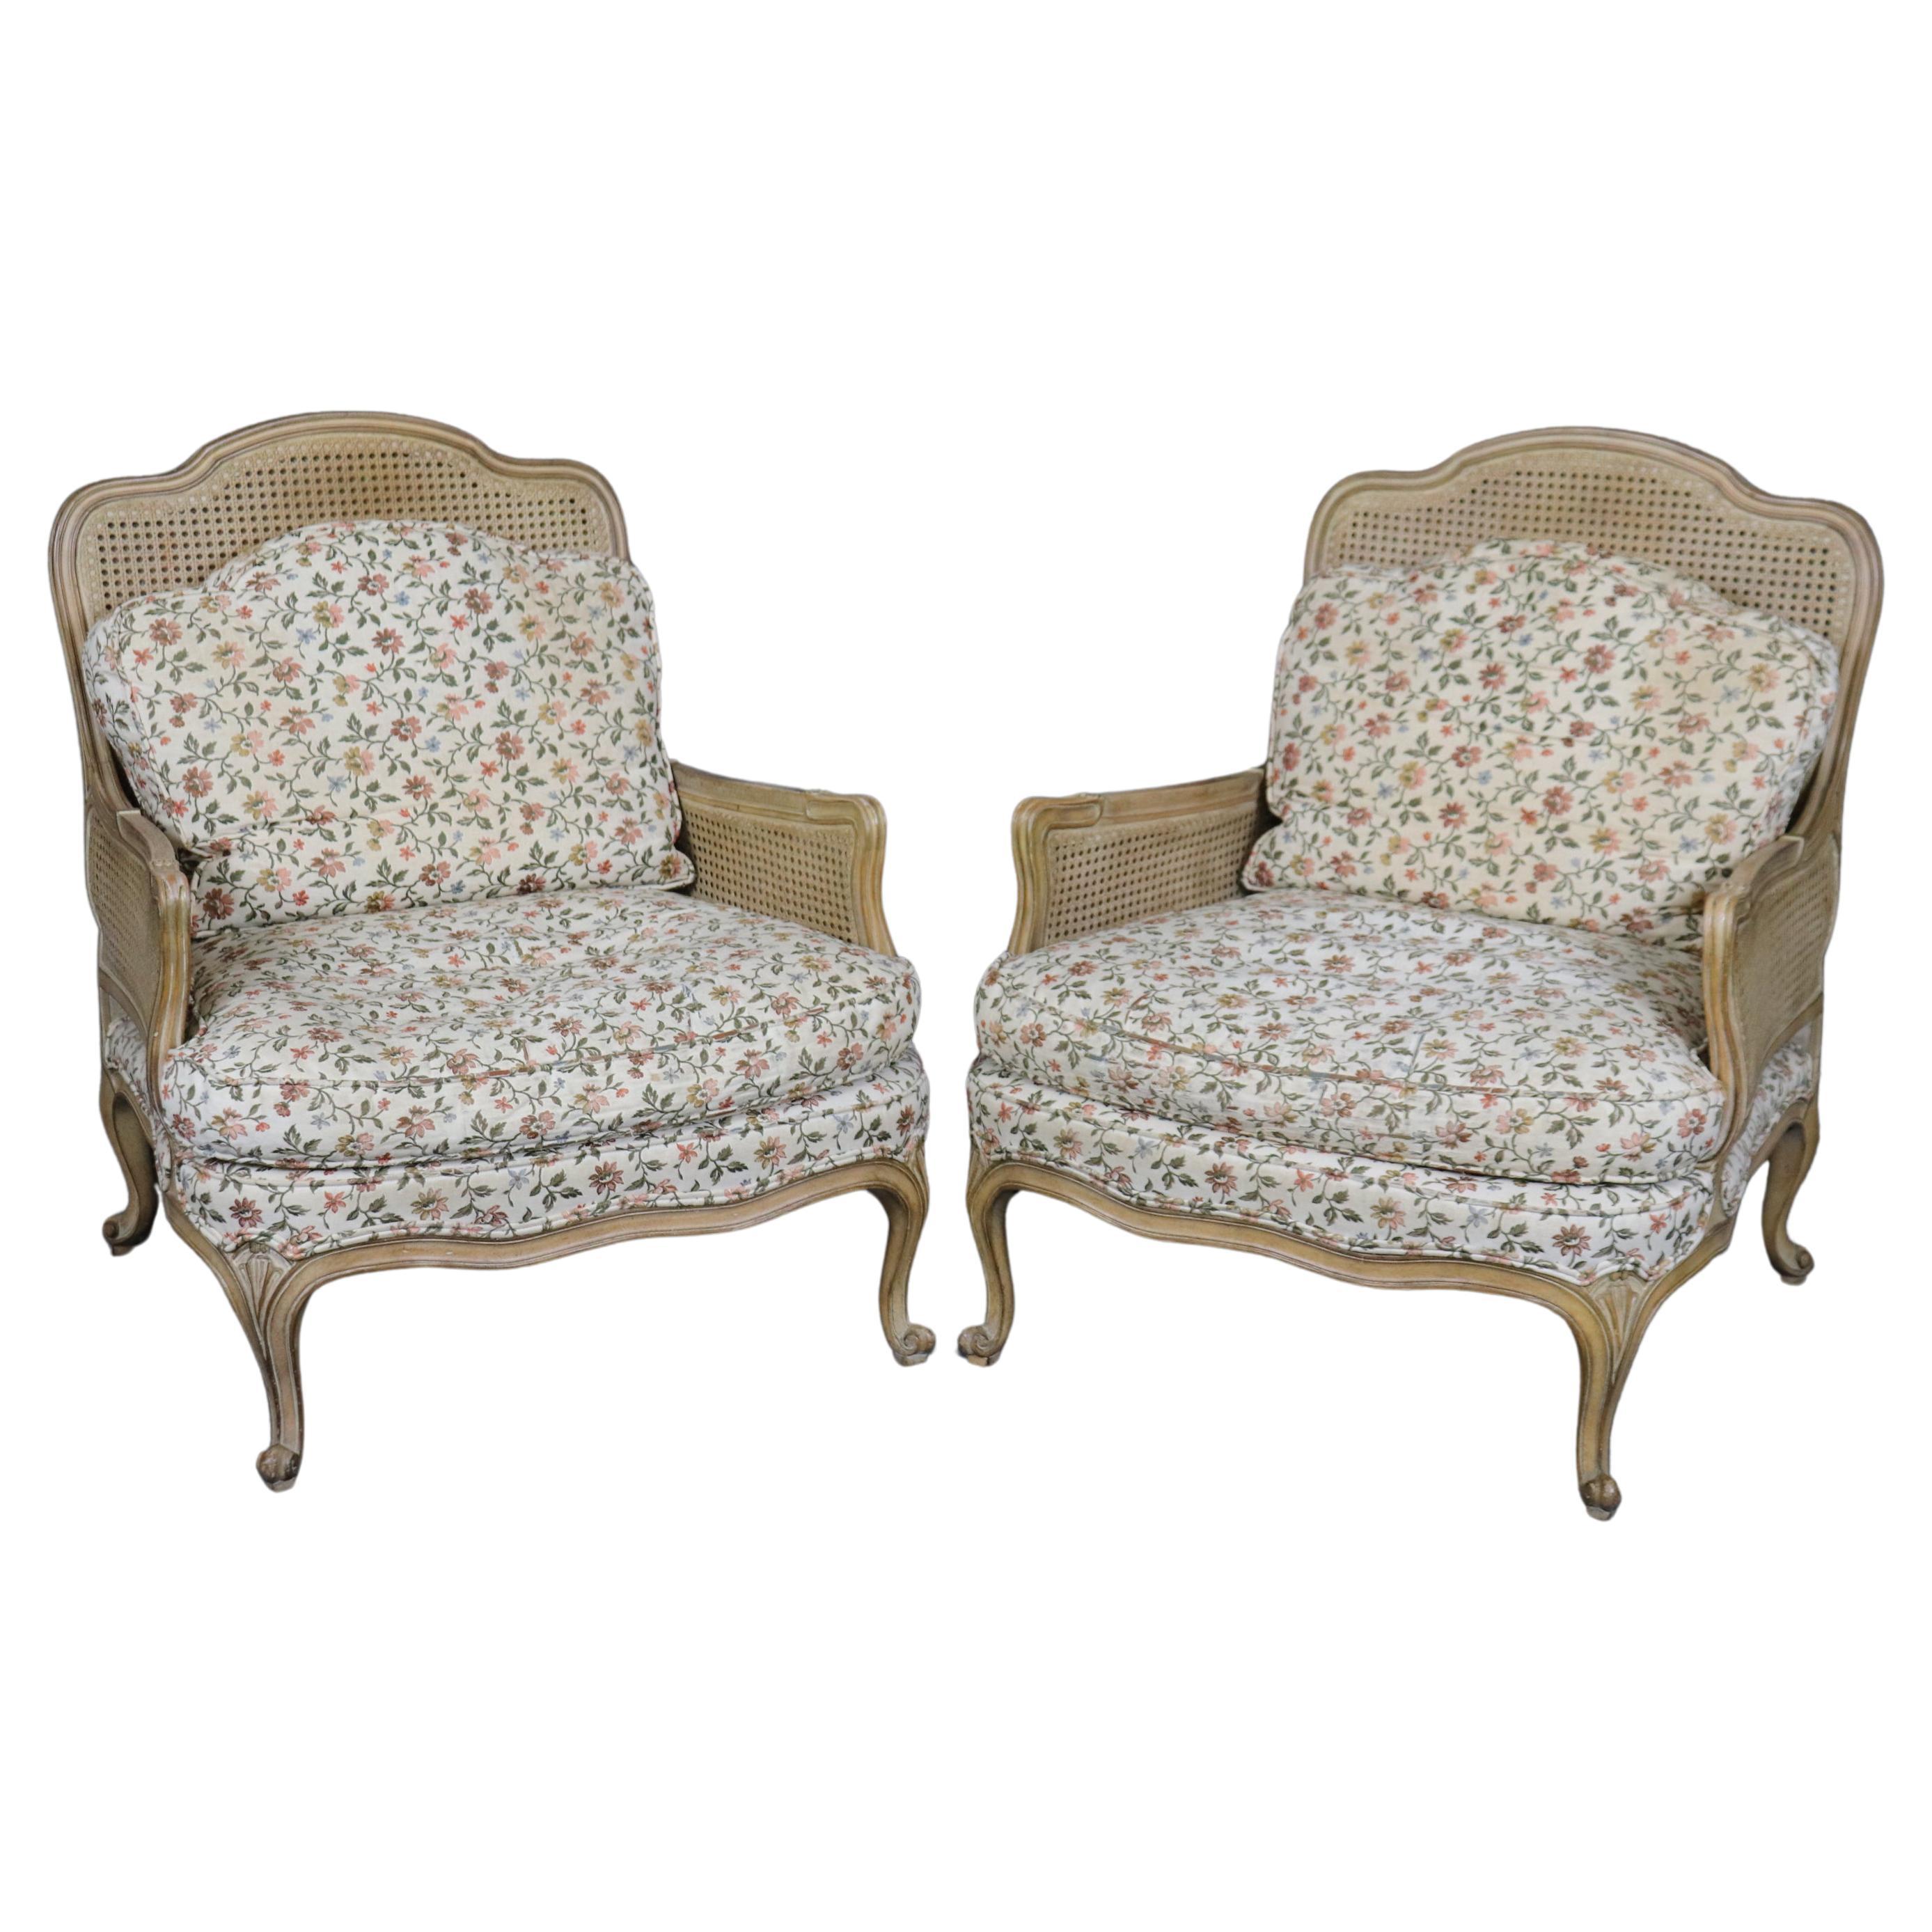 Rare Pair of French Fully Caned Upholstered Bergere Chairs Louis XV 